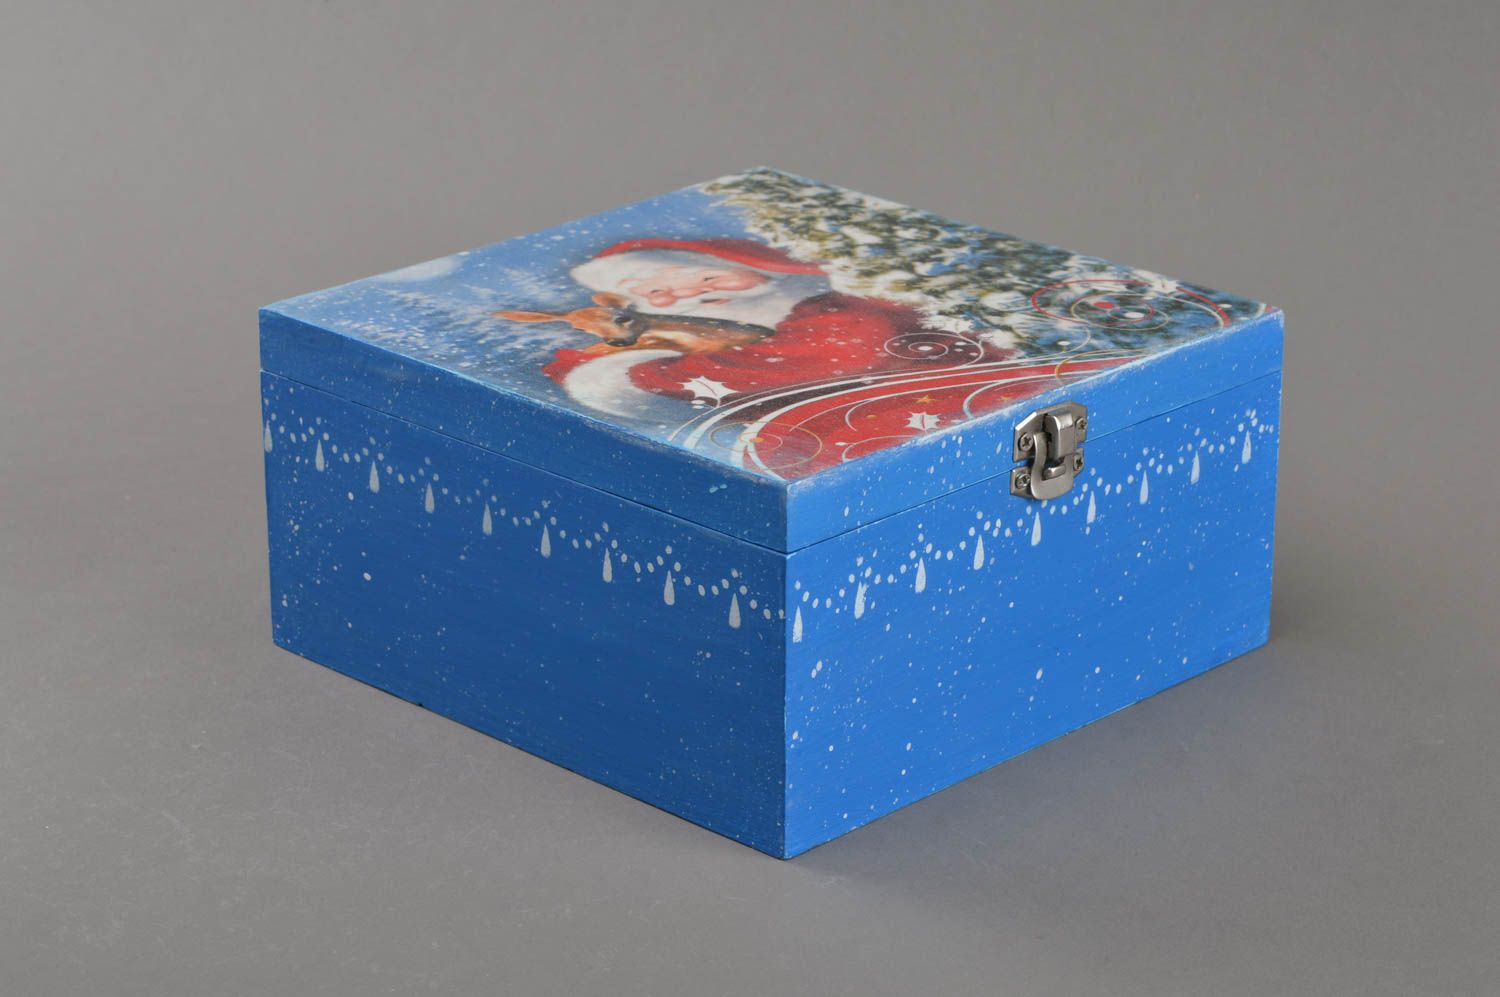 Blue handmade jewelry box made of plywood using decoupage technique with lock photo 1